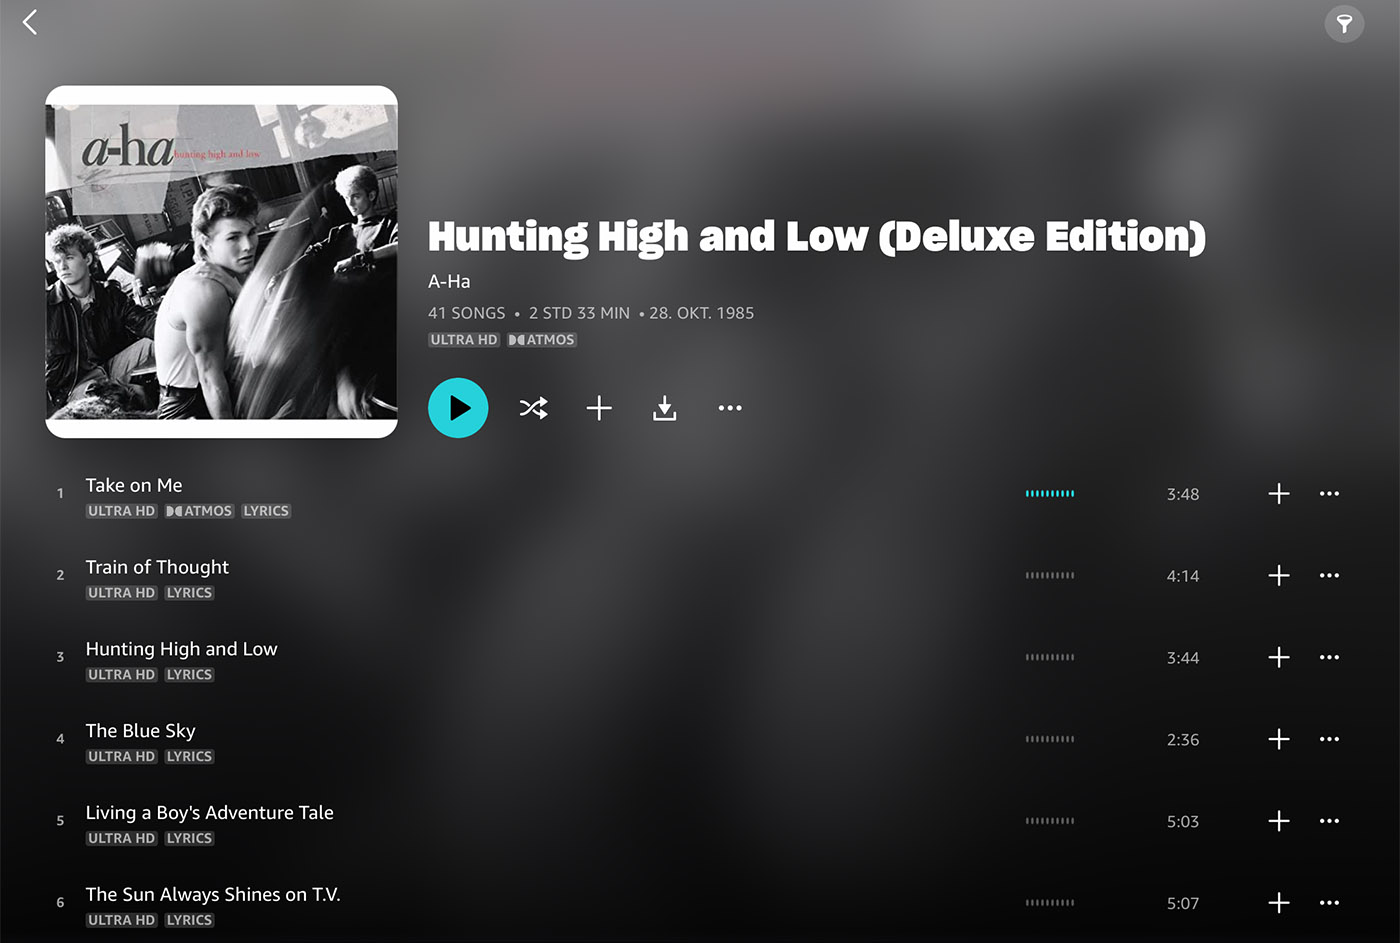 Hunting High and Low von a-ha in Dolby Atmos